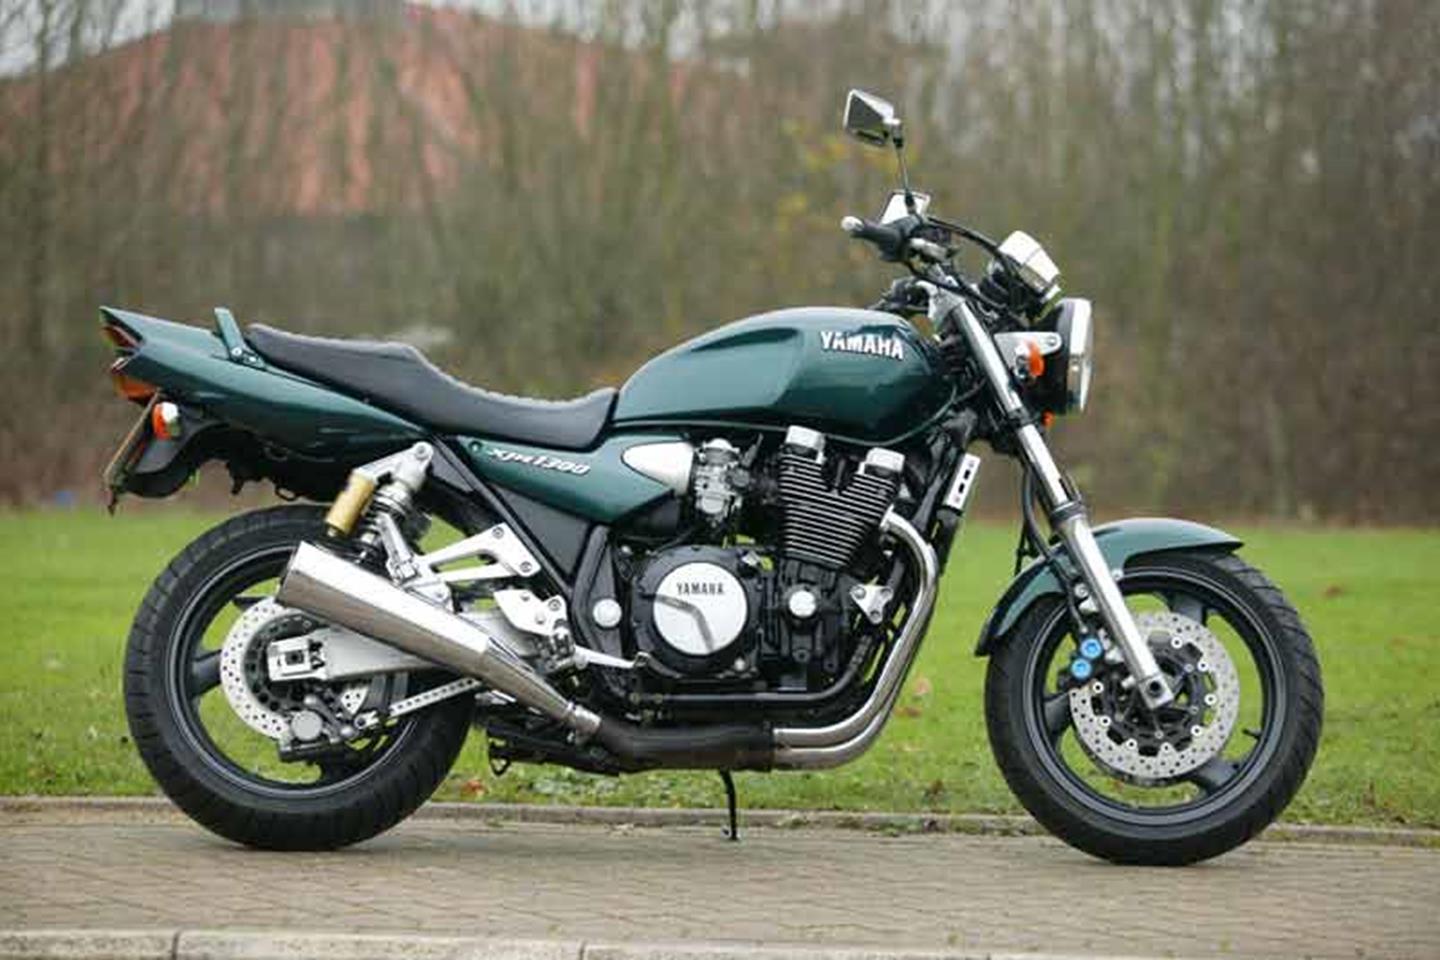 YAMAHA XJR1300 (1998-2014) Review and used buying guide